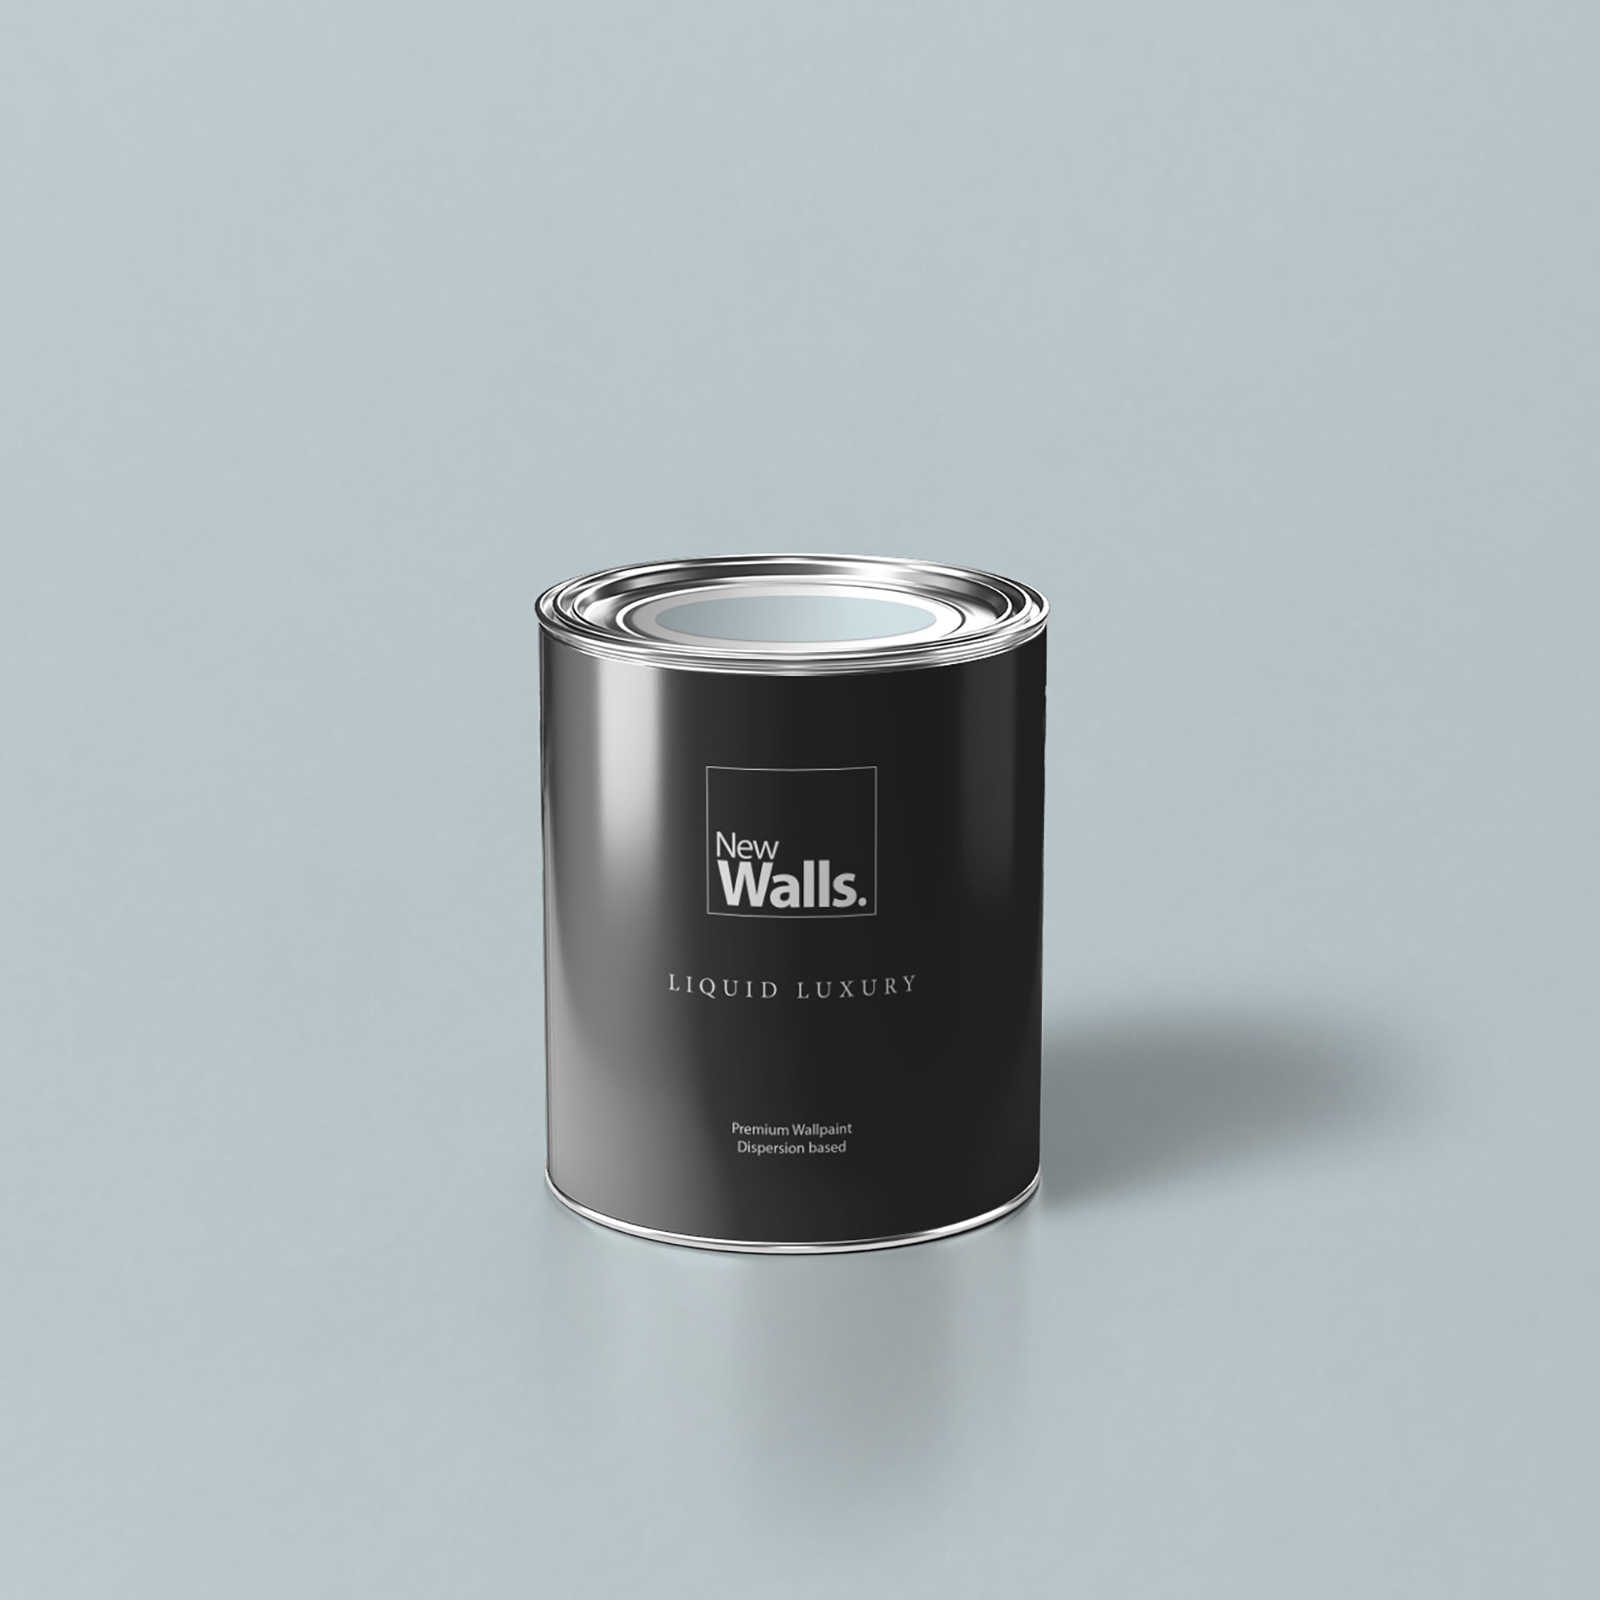         Premium Wall Paint Heavenly Blue Grey »Blissful Blue« NW300 – 1 litre
    